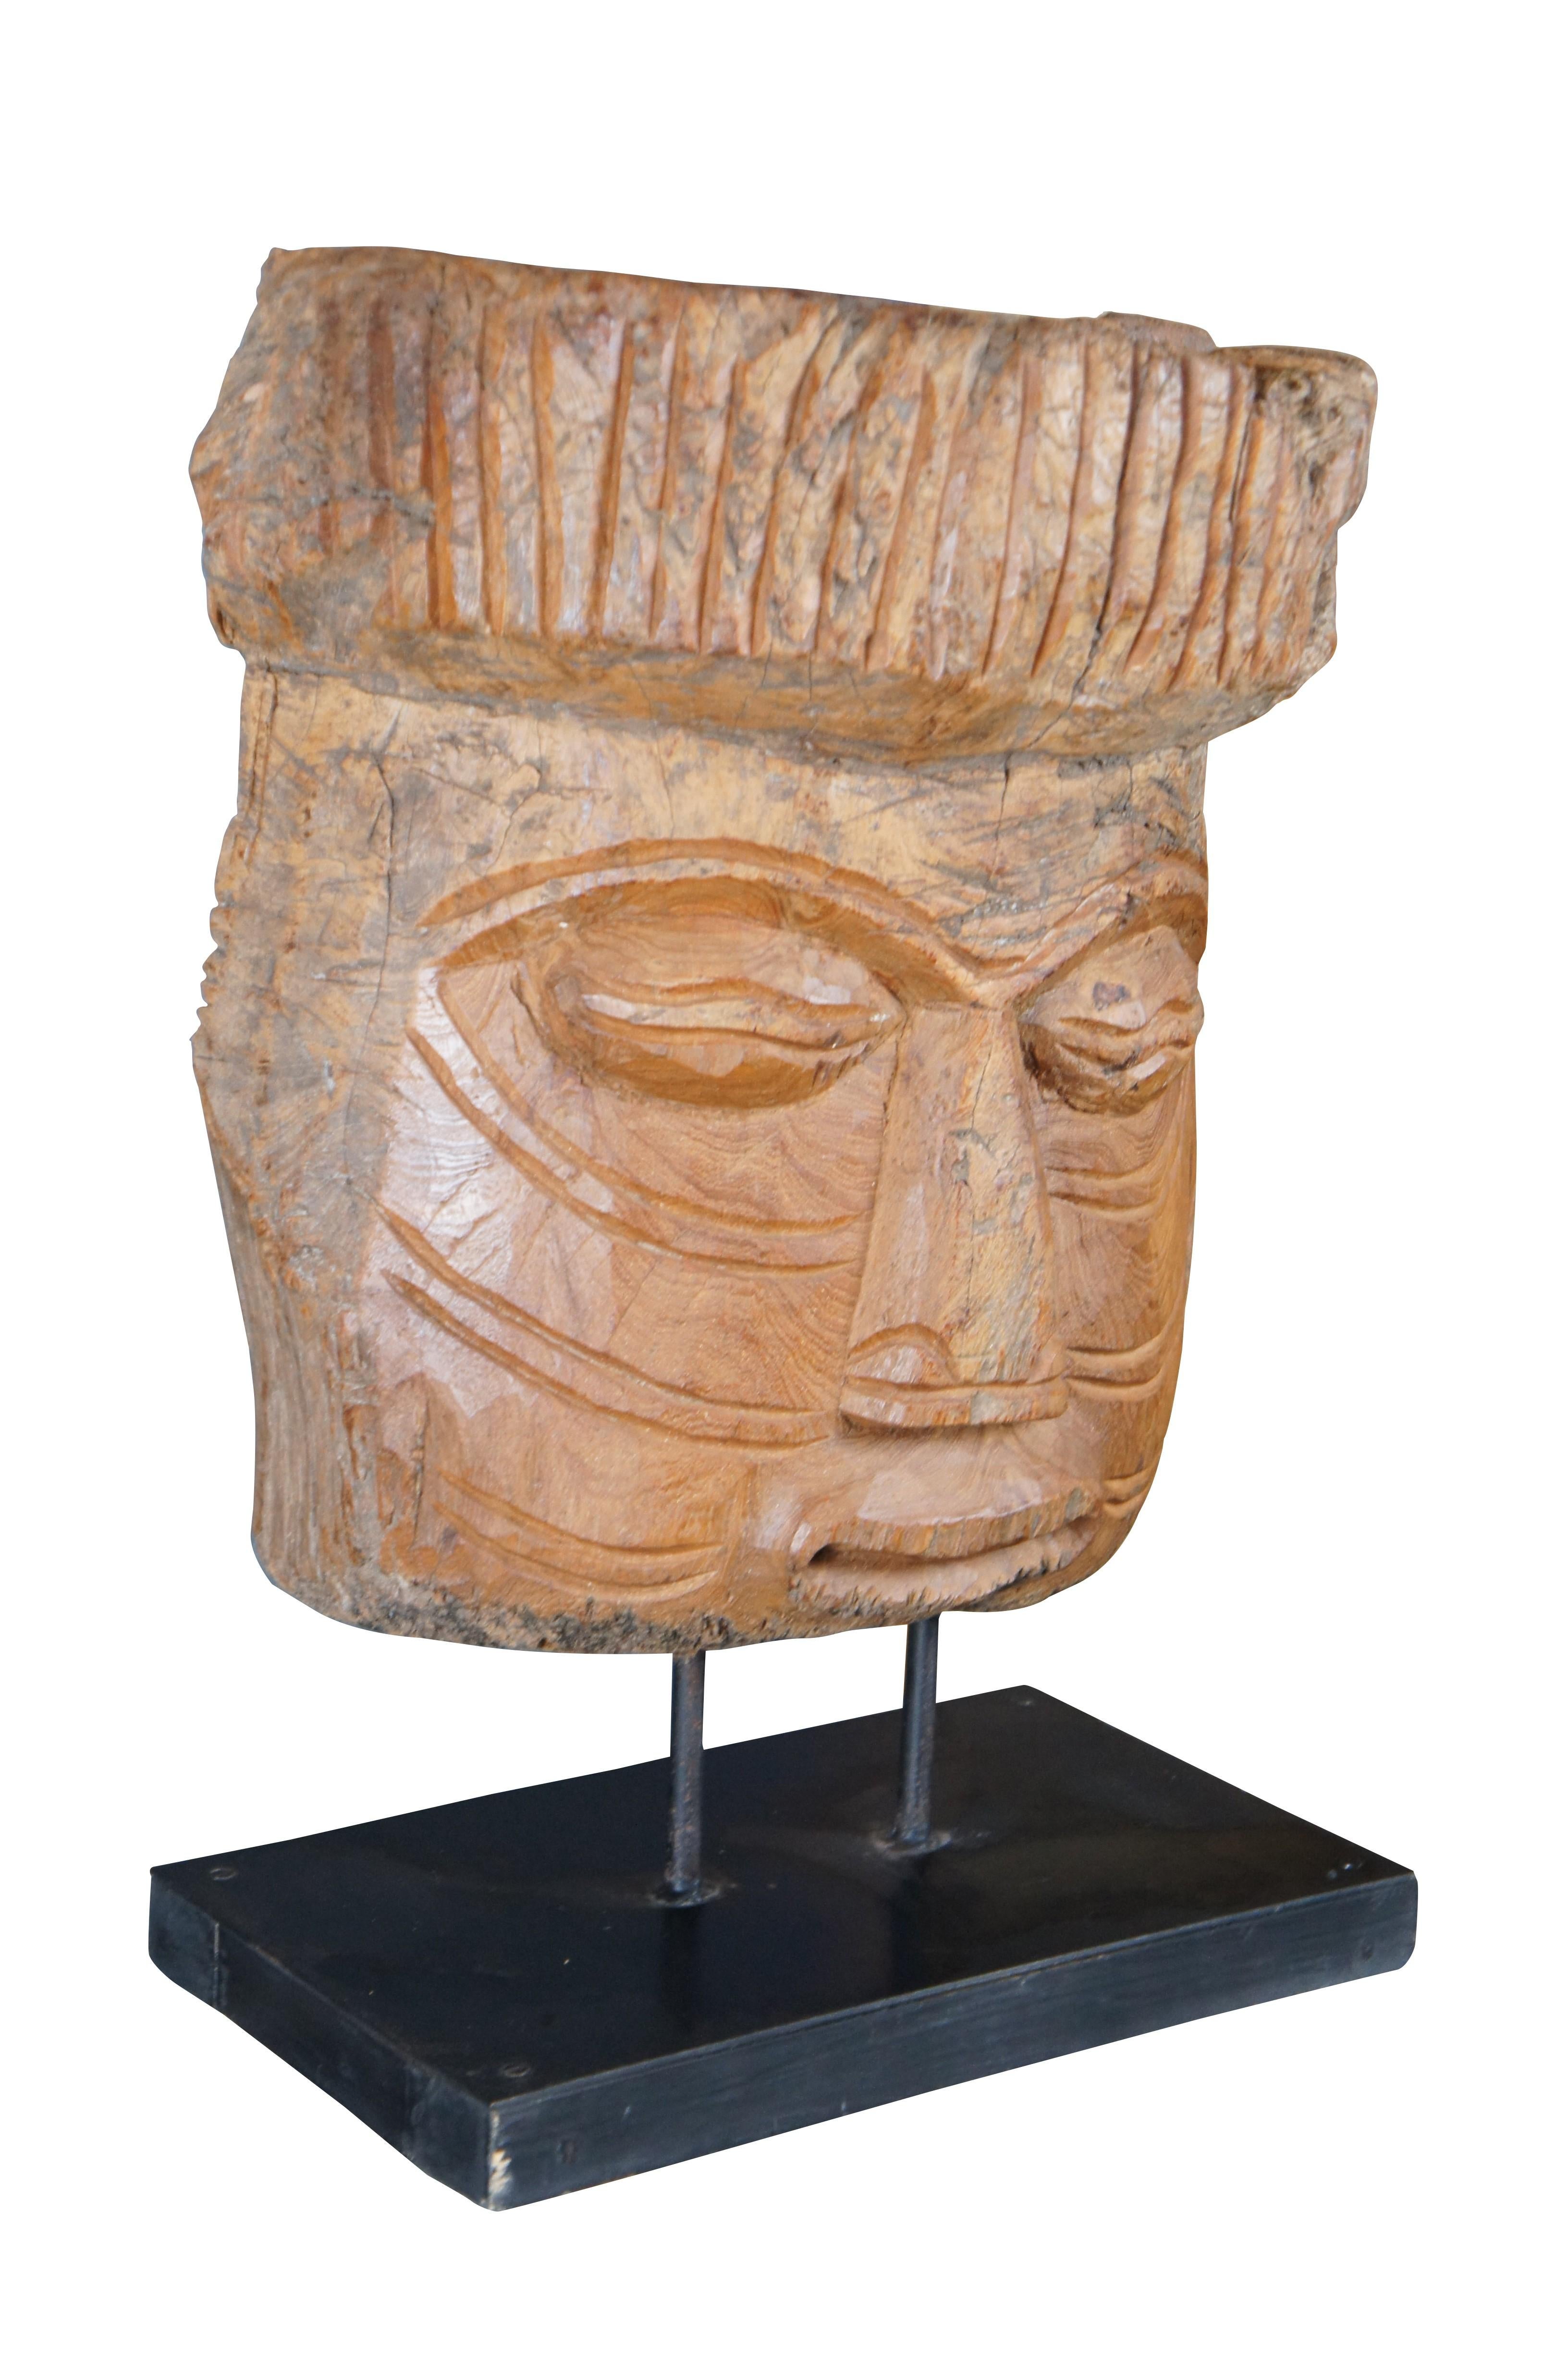 Late 20th Century Mesoamerican style tribal mask on black finished wooden stand. The mask is carved from part of a tree trunk with intricate detail.

Dimensions:
9.5